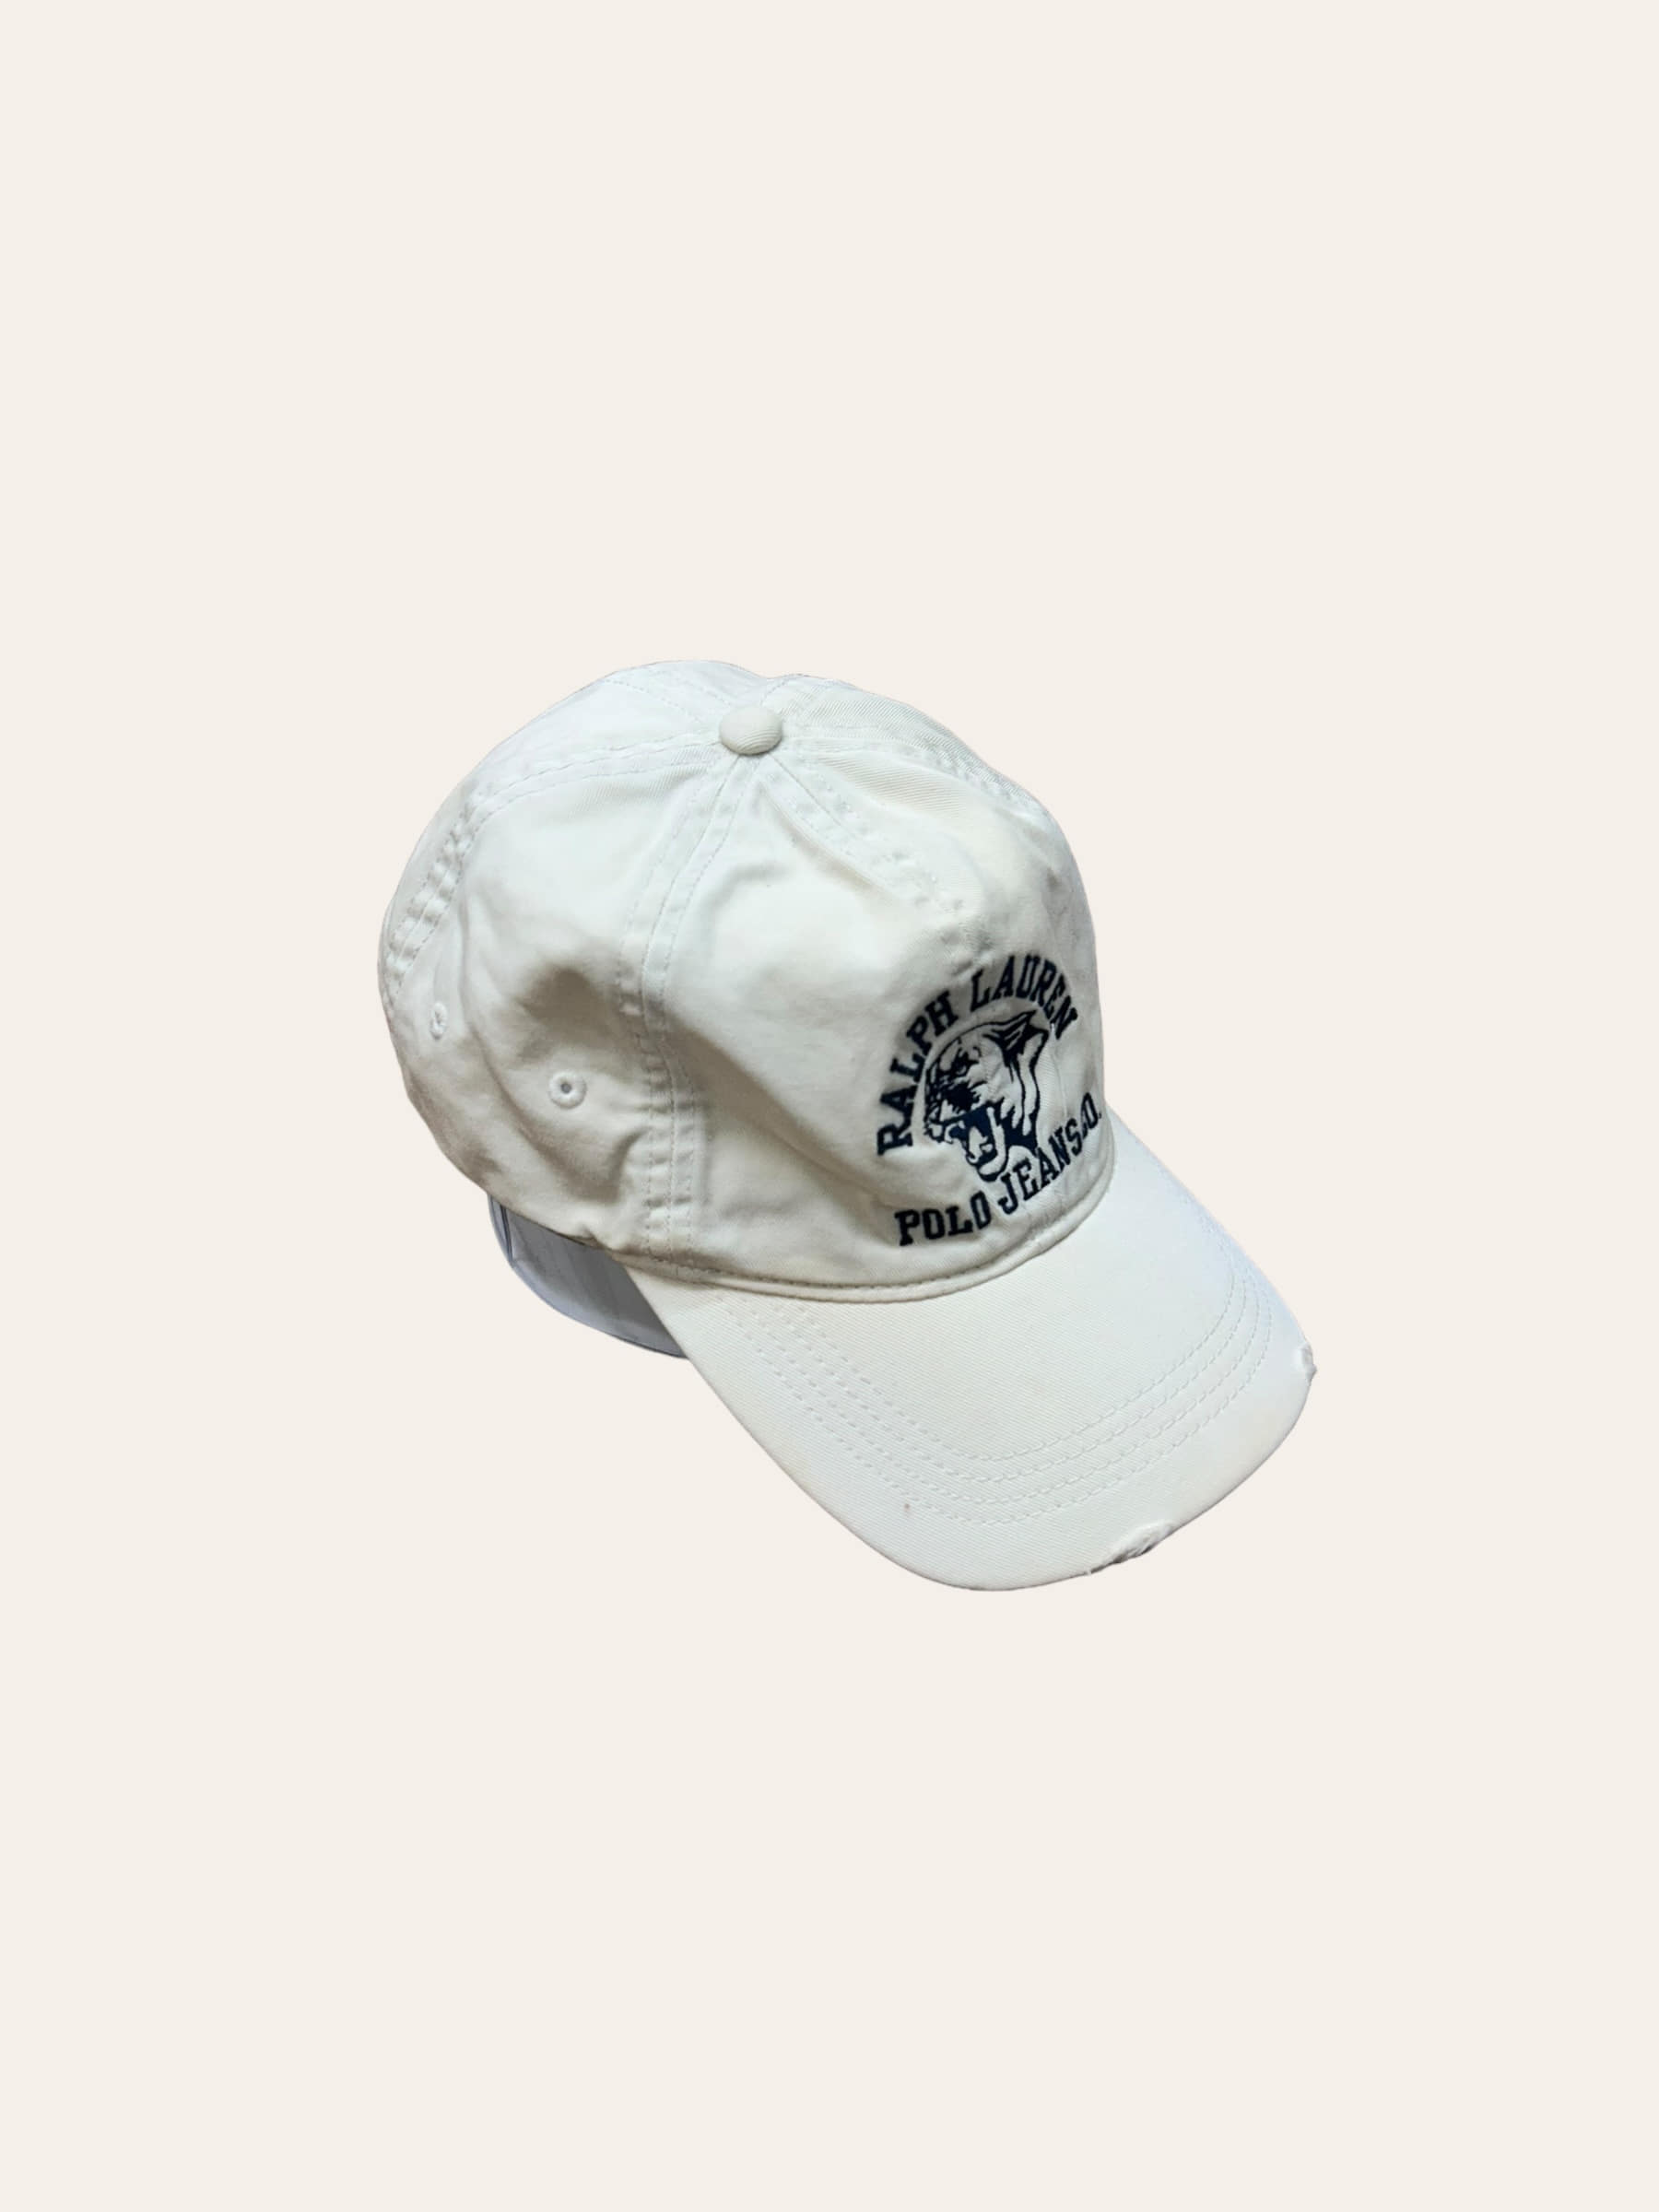 Polo jeans company beige embroidered cap